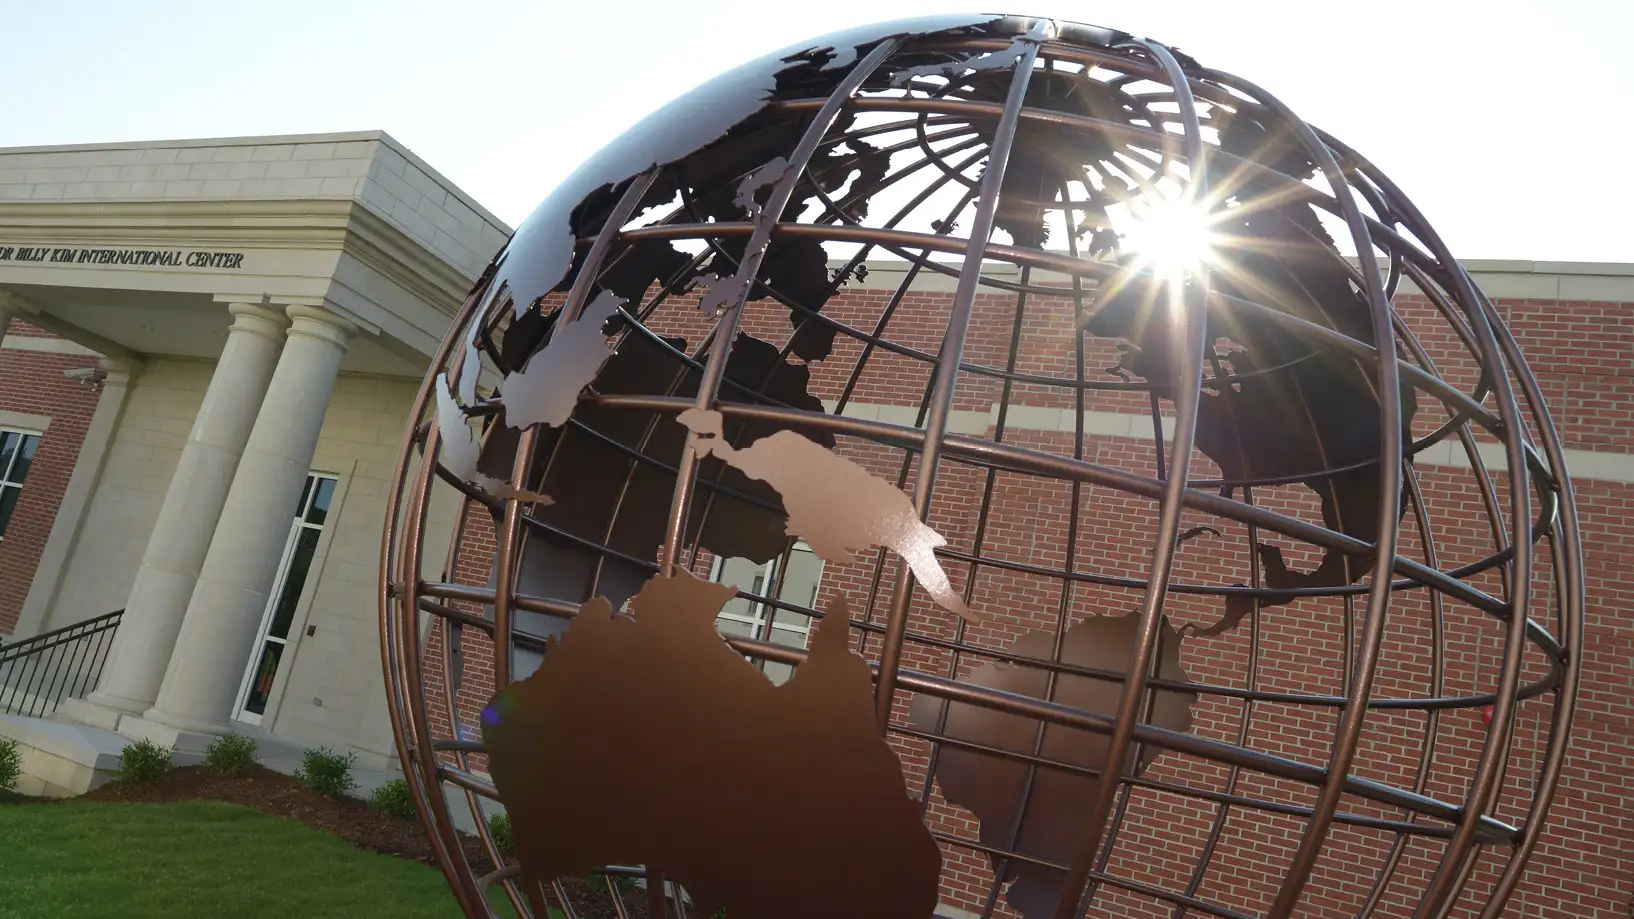 the globe in front of billy kim international center